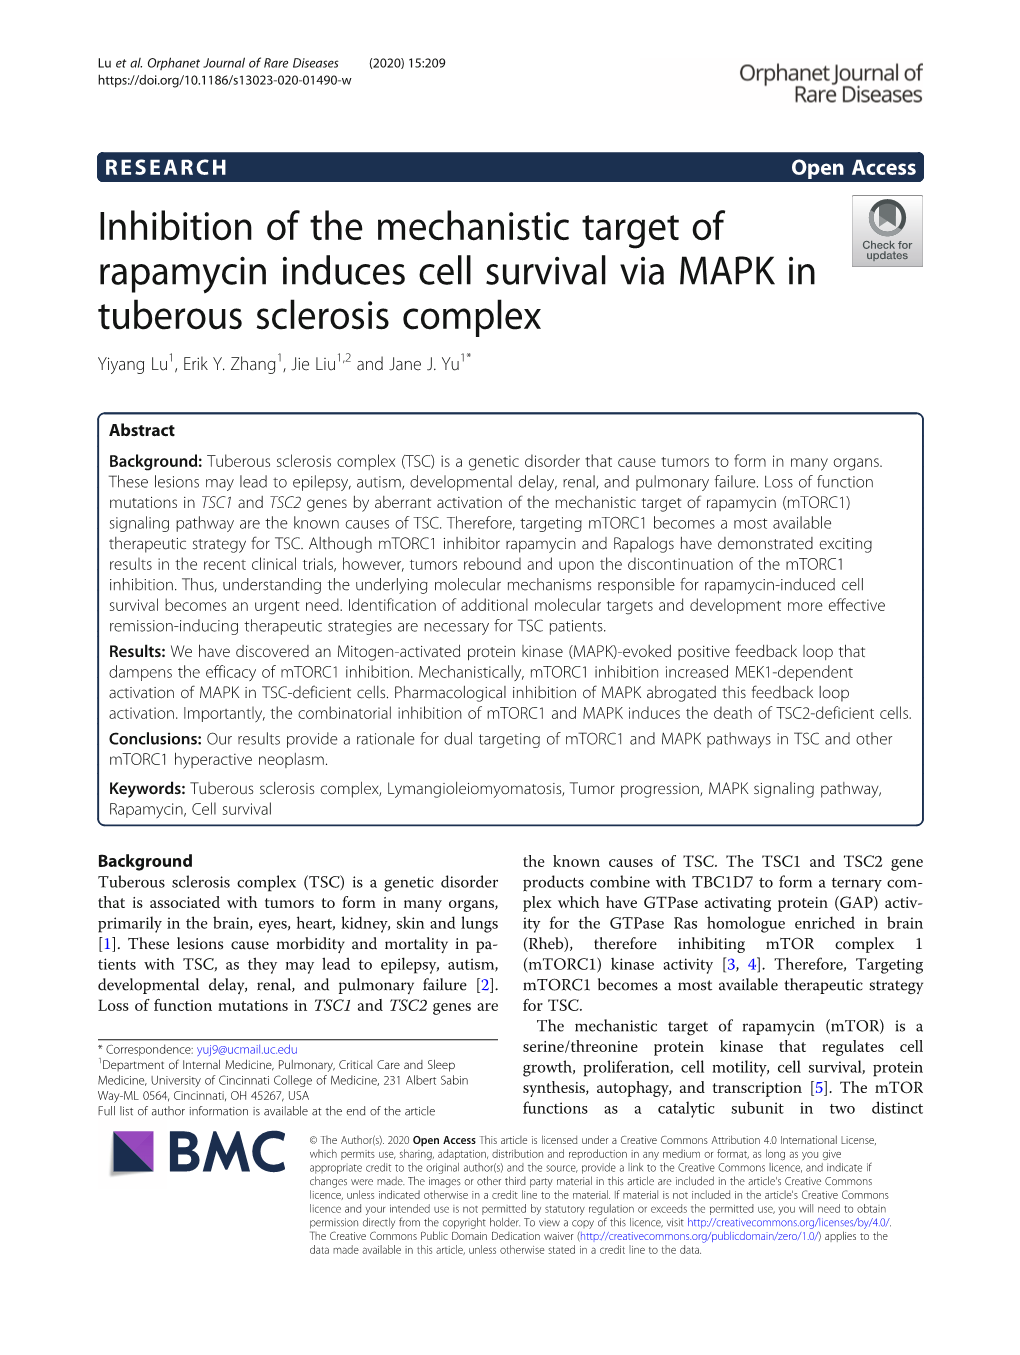 Inhibition of the Mechanistic Target of Rapamycin Induces Cell Survival Via MAPK in Tuberous Sclerosis Complex Yiyang Lu1, Erik Y